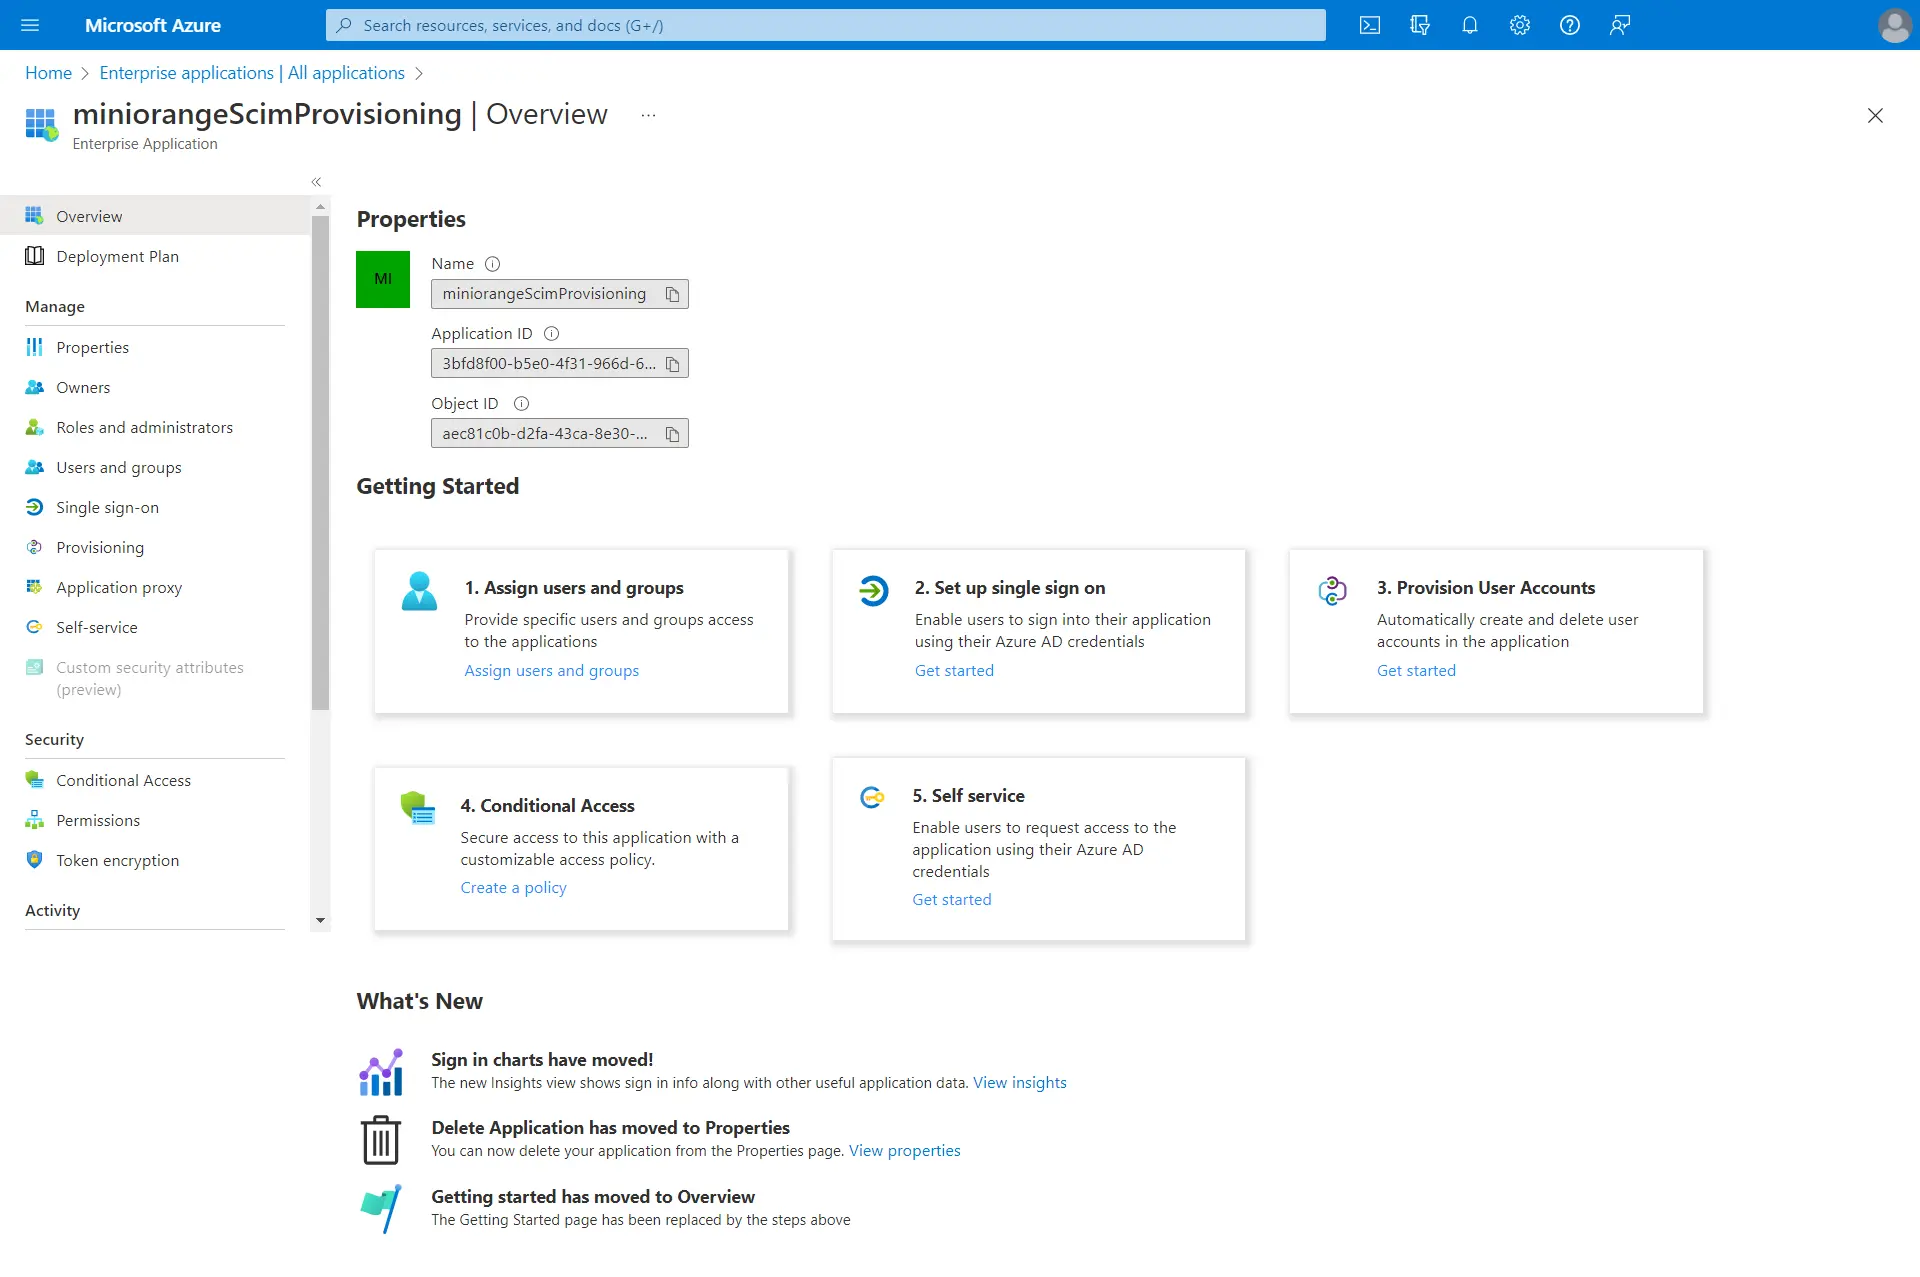 Provisioning with Azure AD